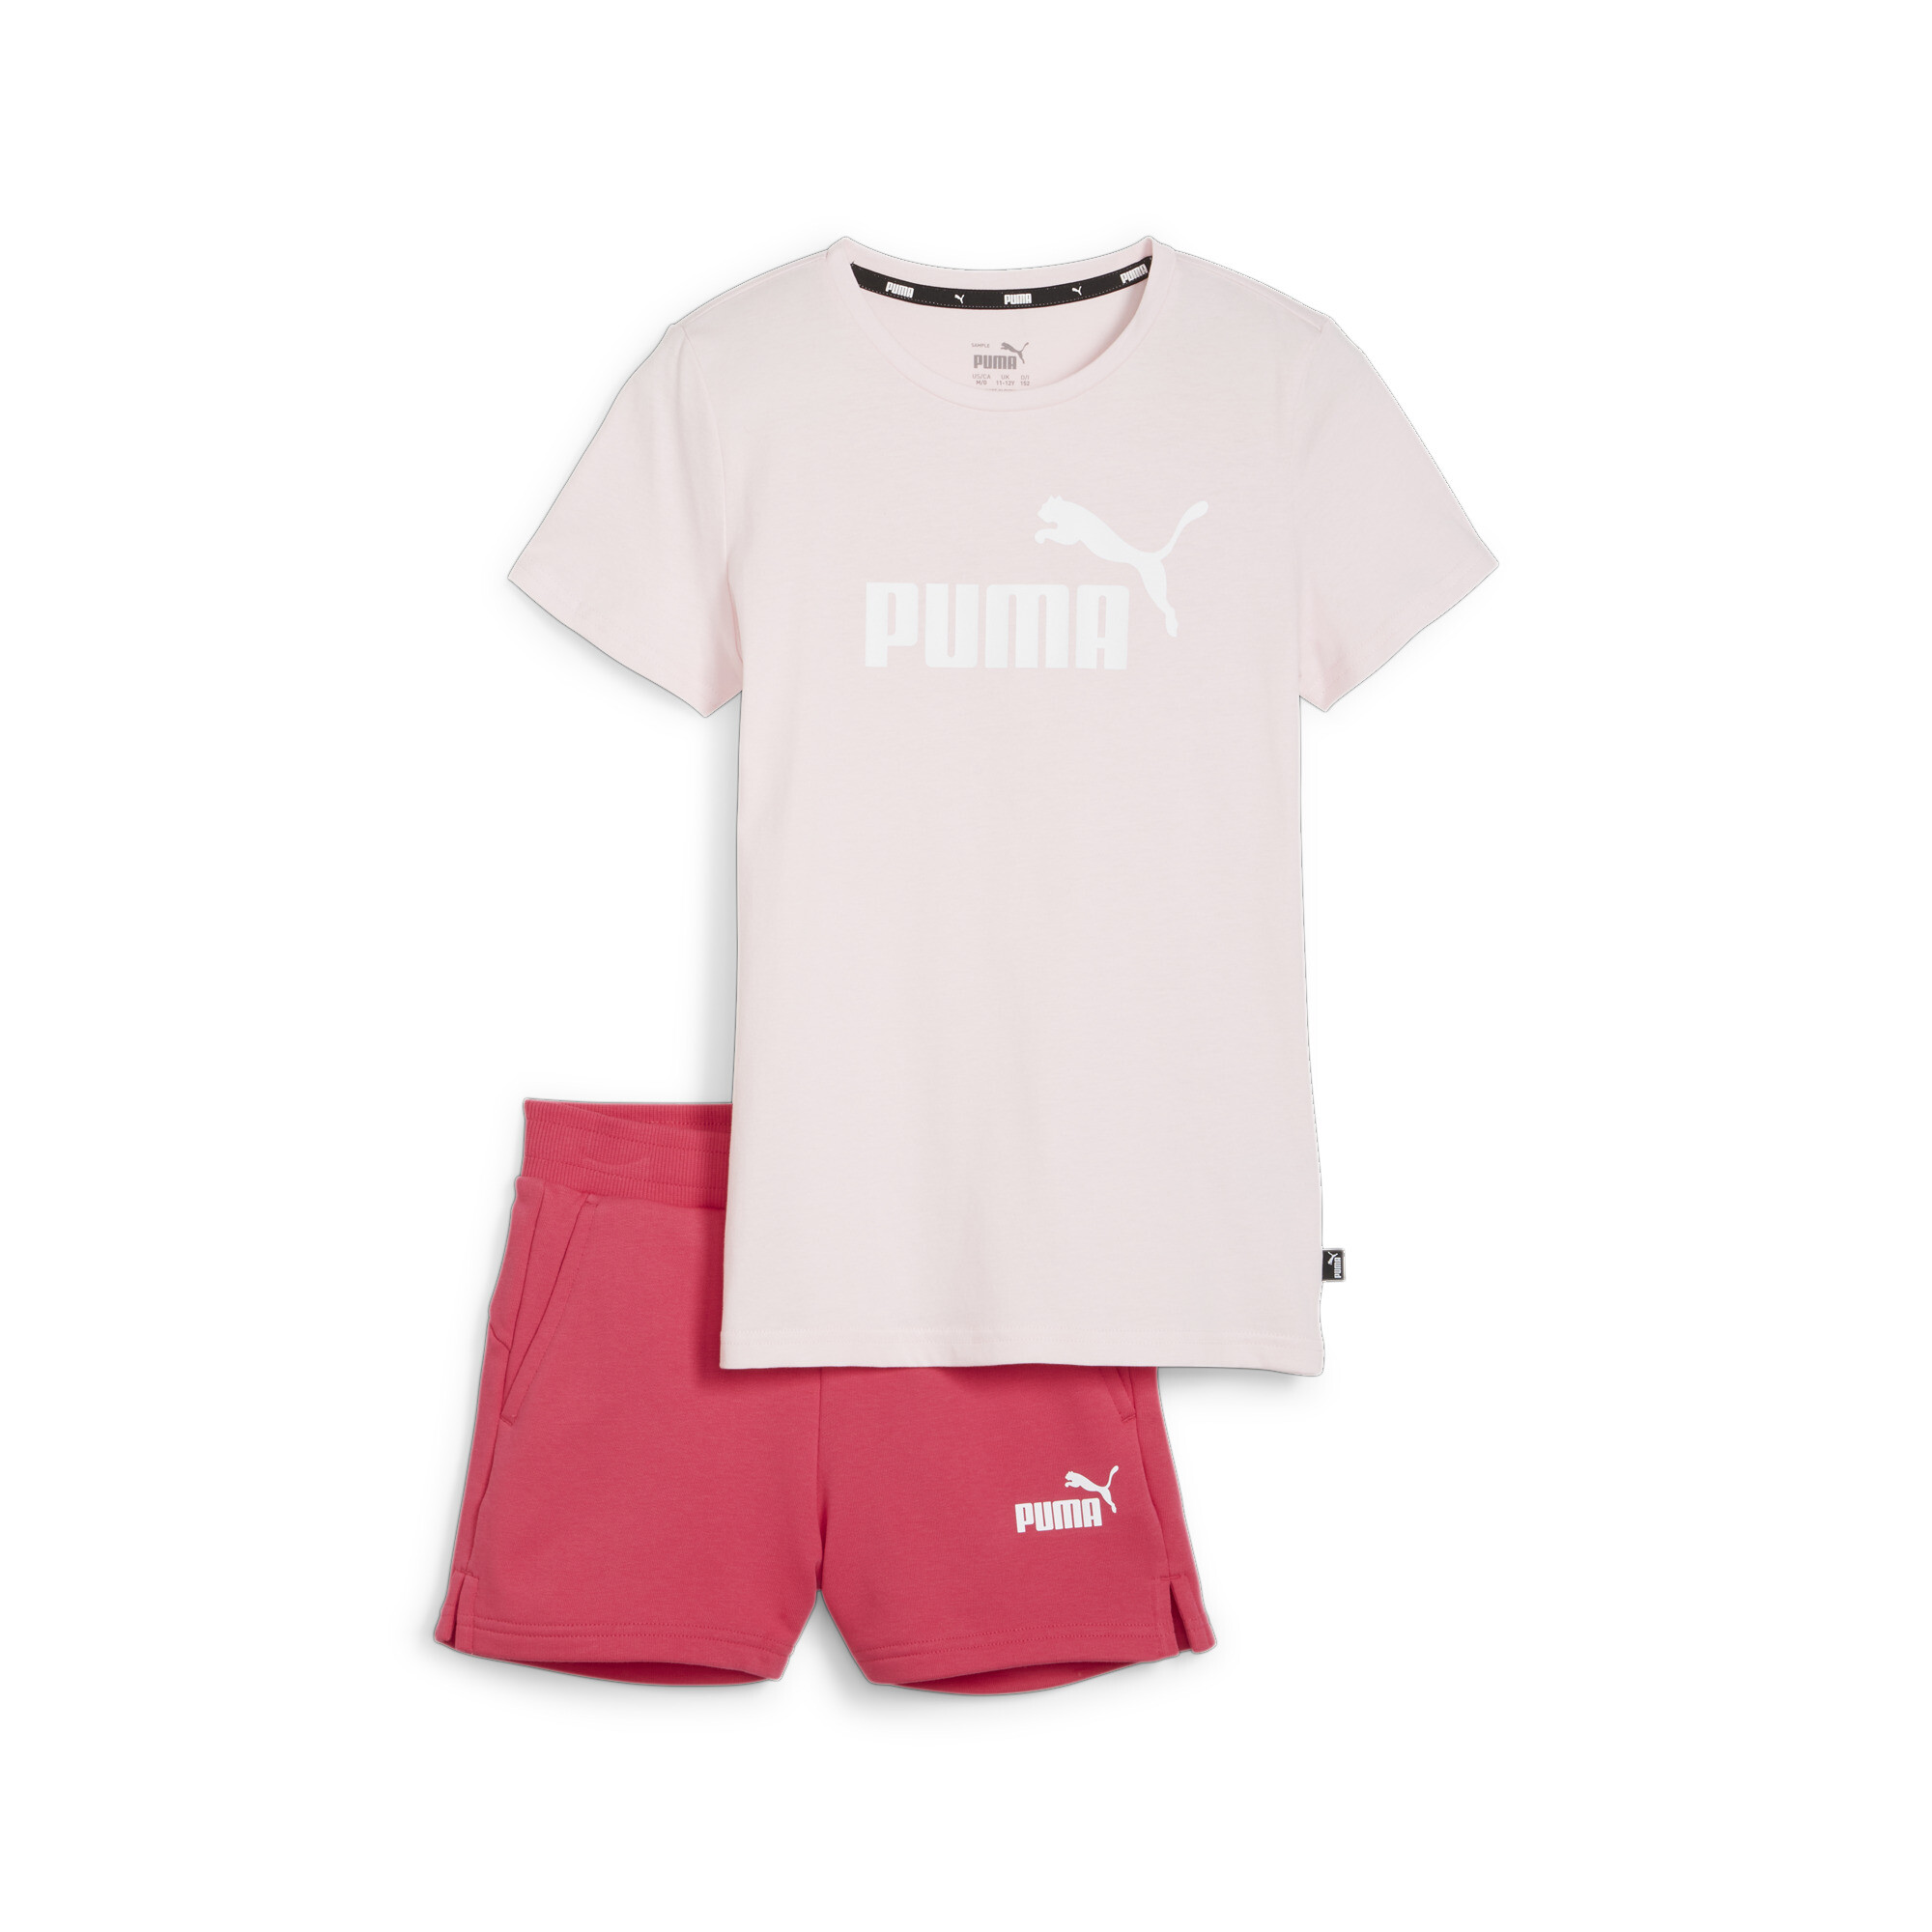 Women's Puma Logo Tee And Shorts Youth Set, Pink, Size 9-10Y, Clothing